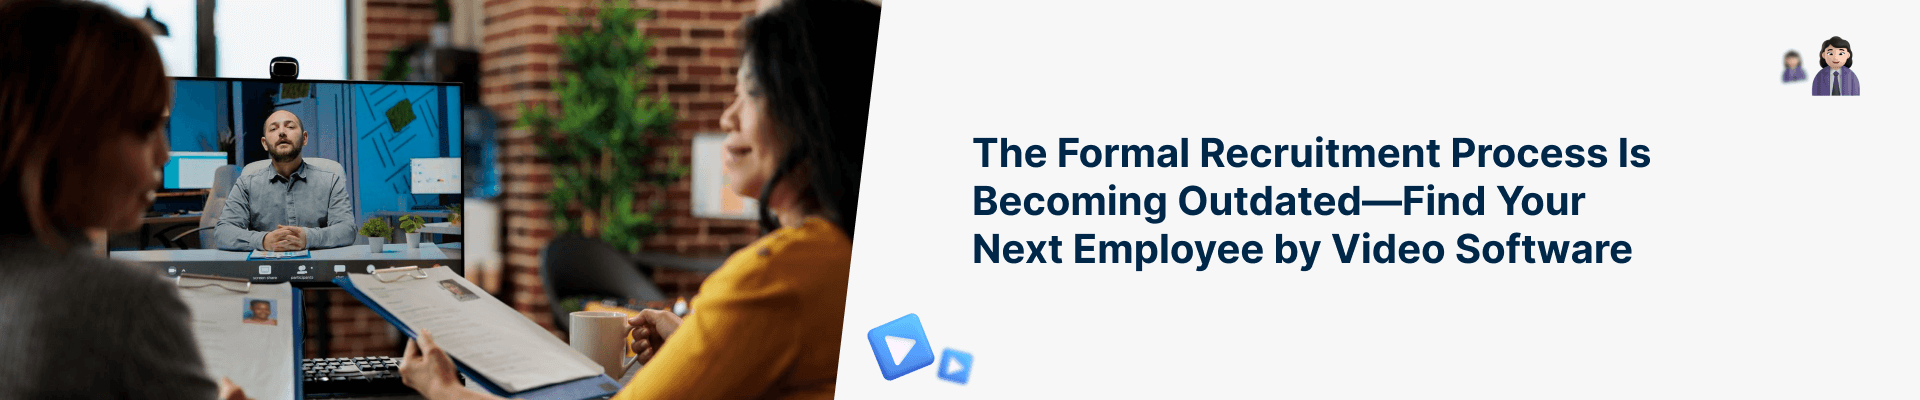 The Formal Recruitment Process Is Becoming Outdated—Find Your Next Employee by Video Software